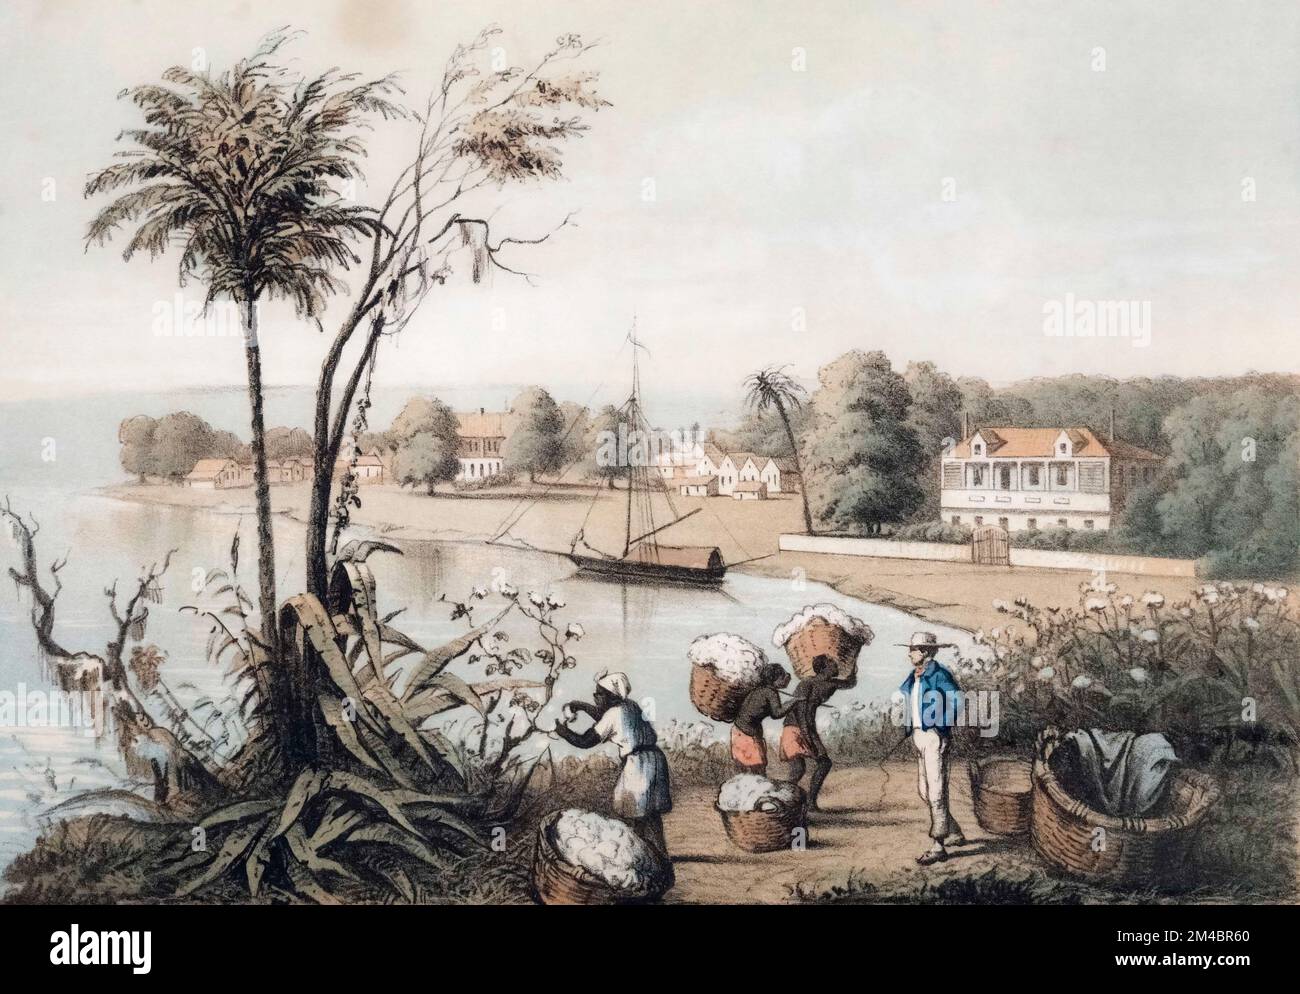 A cotton plantation beside the Mississippi river.   An overseer with a whip supervises slaves picking cotton and carrying baskets of cotton.  After a mid-19th century work by Henry Lewis. Stock Photo